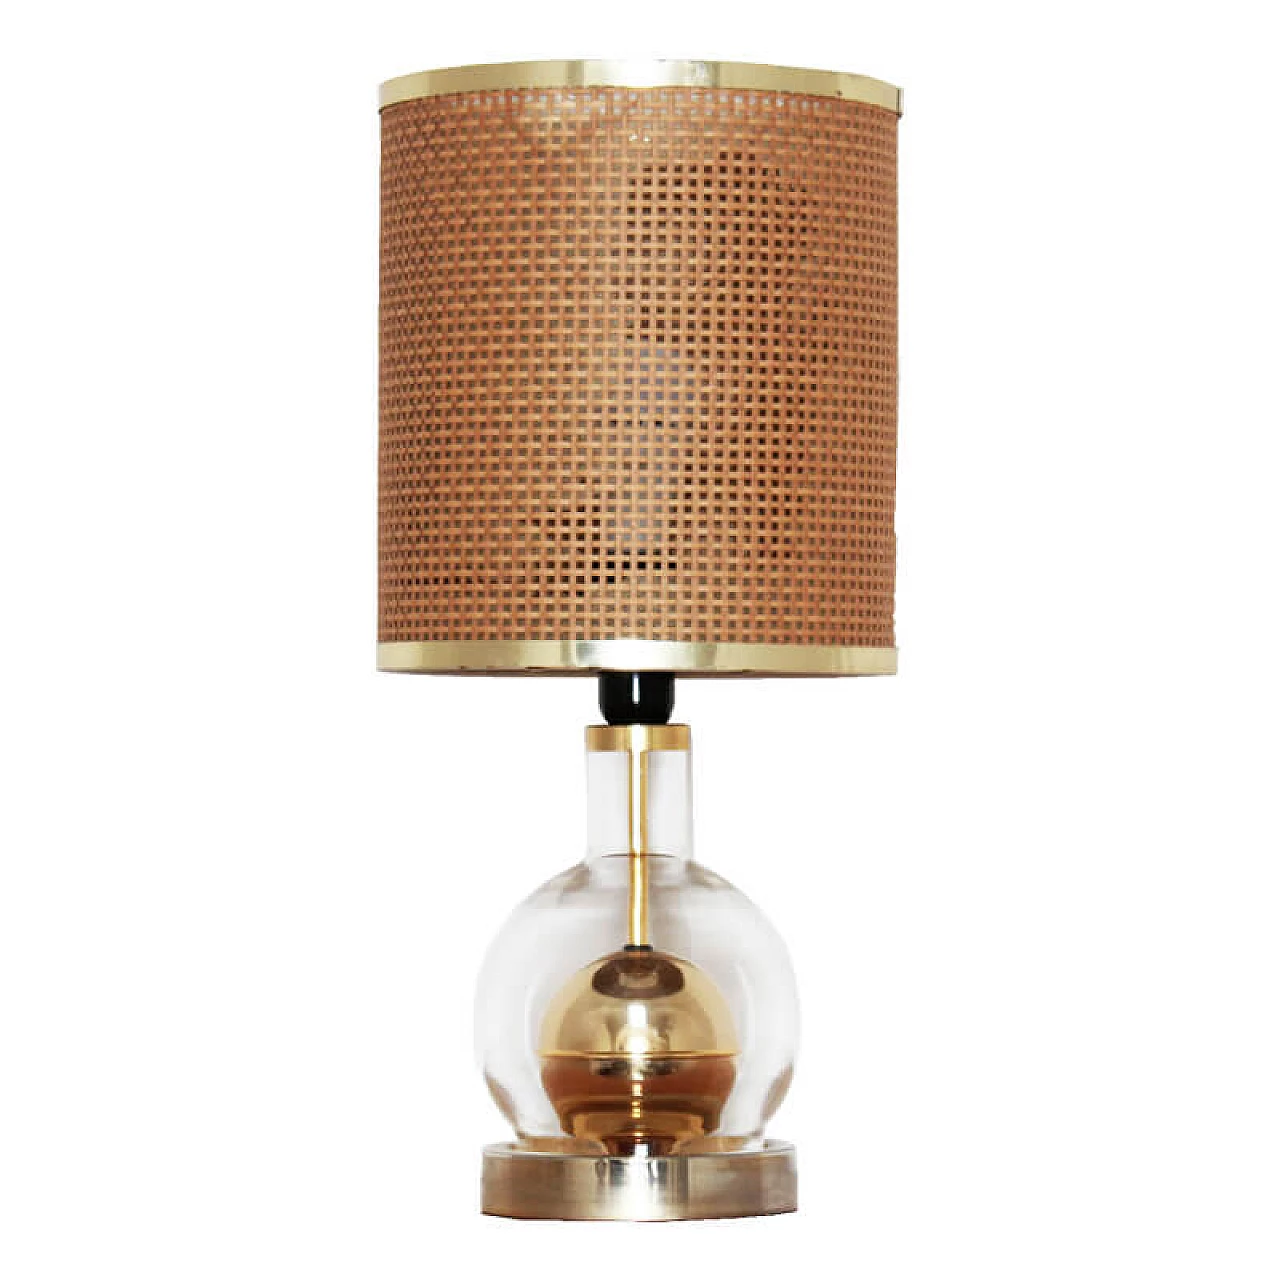 Brass lamp with wicker lampshade, 70s 1075074